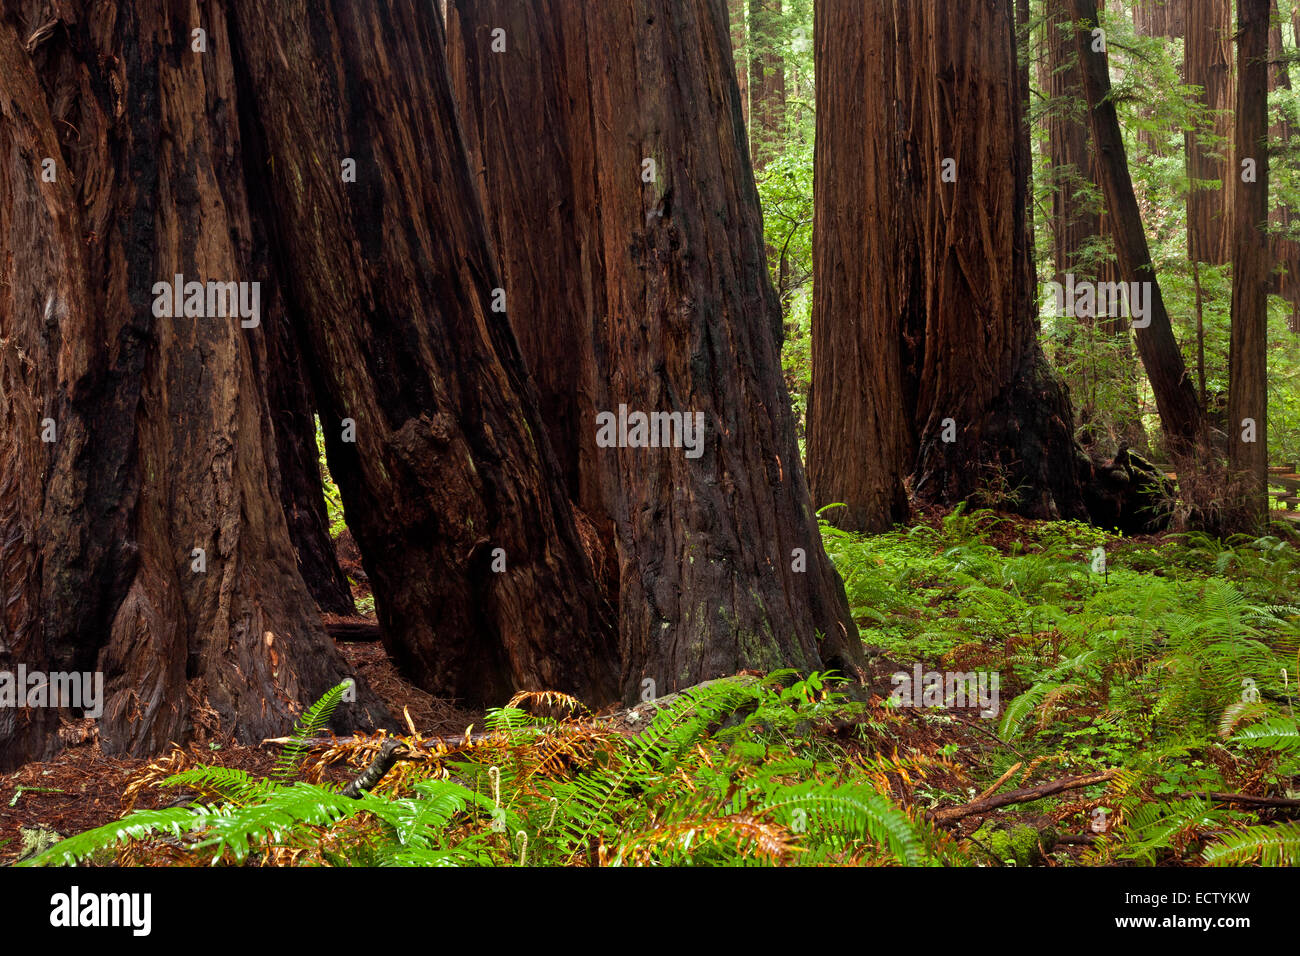 CA02557-00...CALIFORNIA - Giant redwood trees in Muir Woods National Monument. Stock Photo